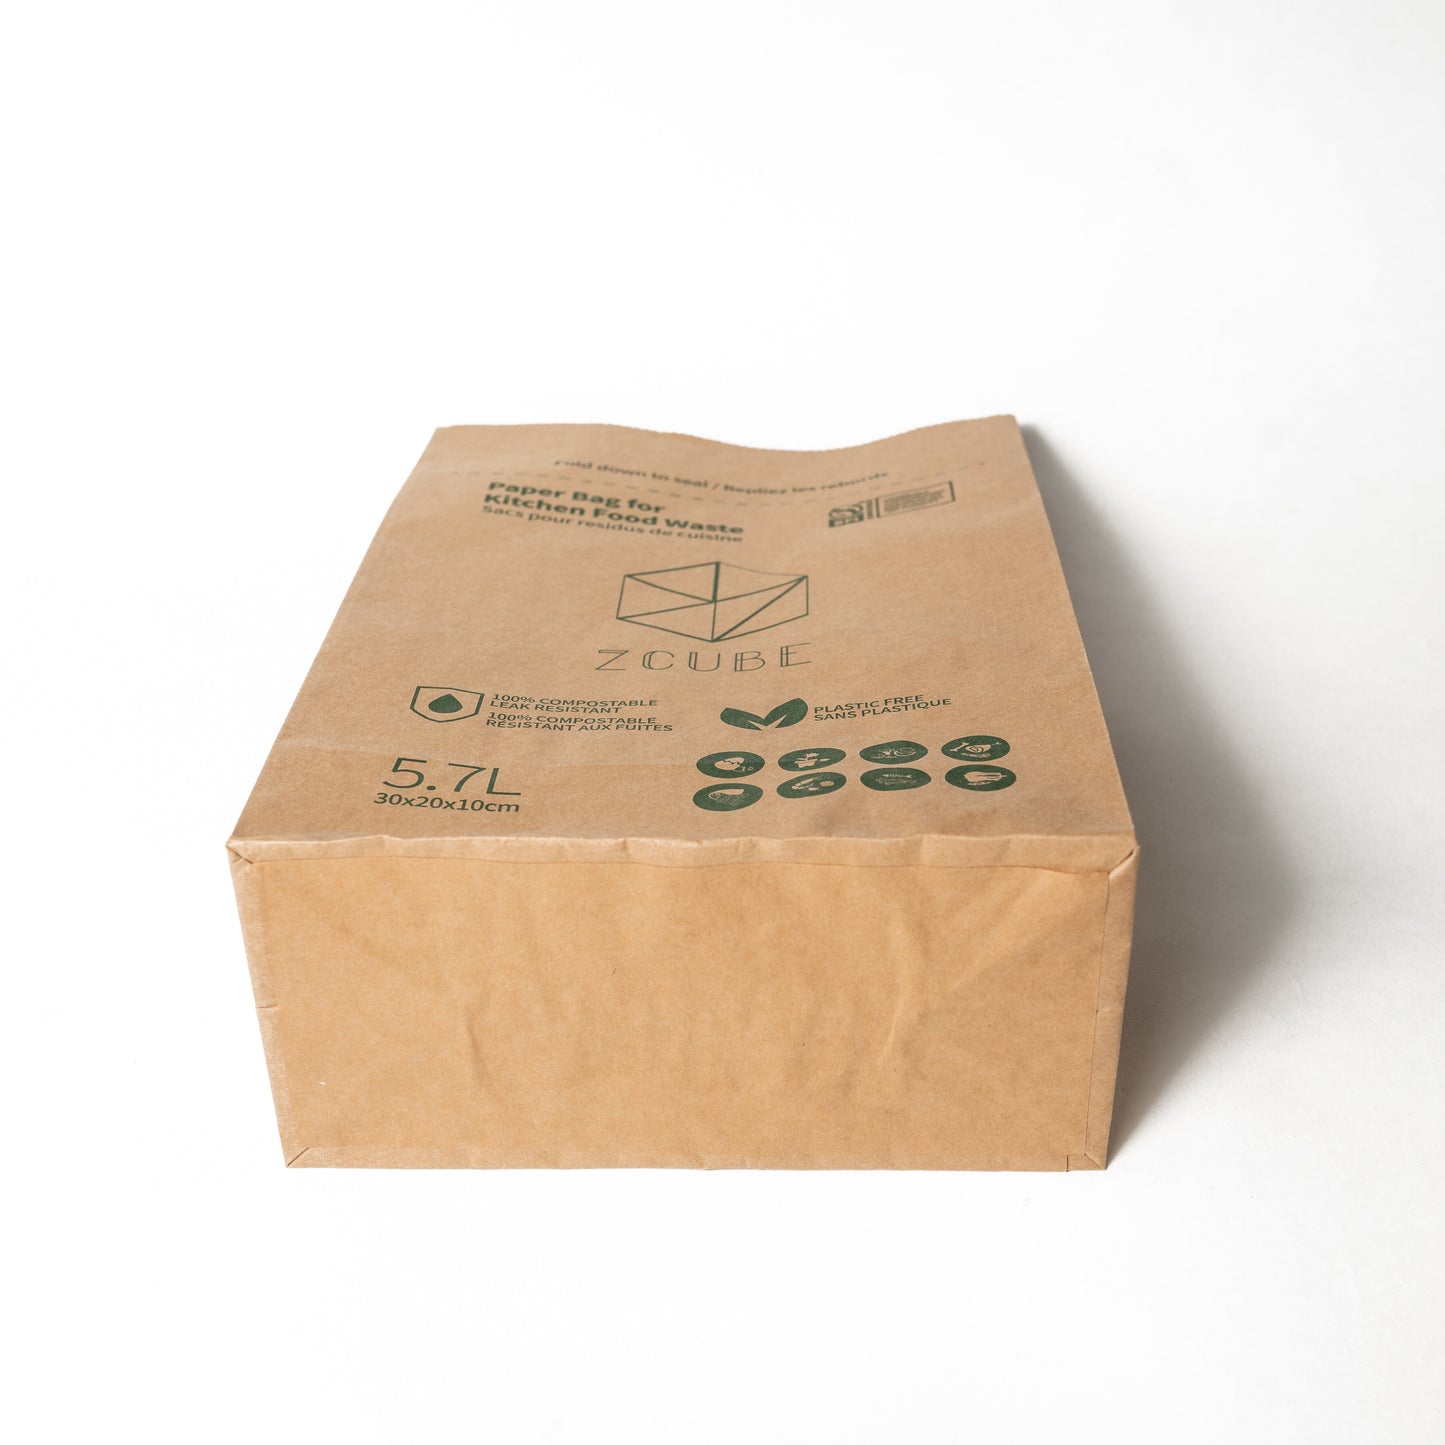 Zcube Kitchen Food Waste Paper Bag-60 bags